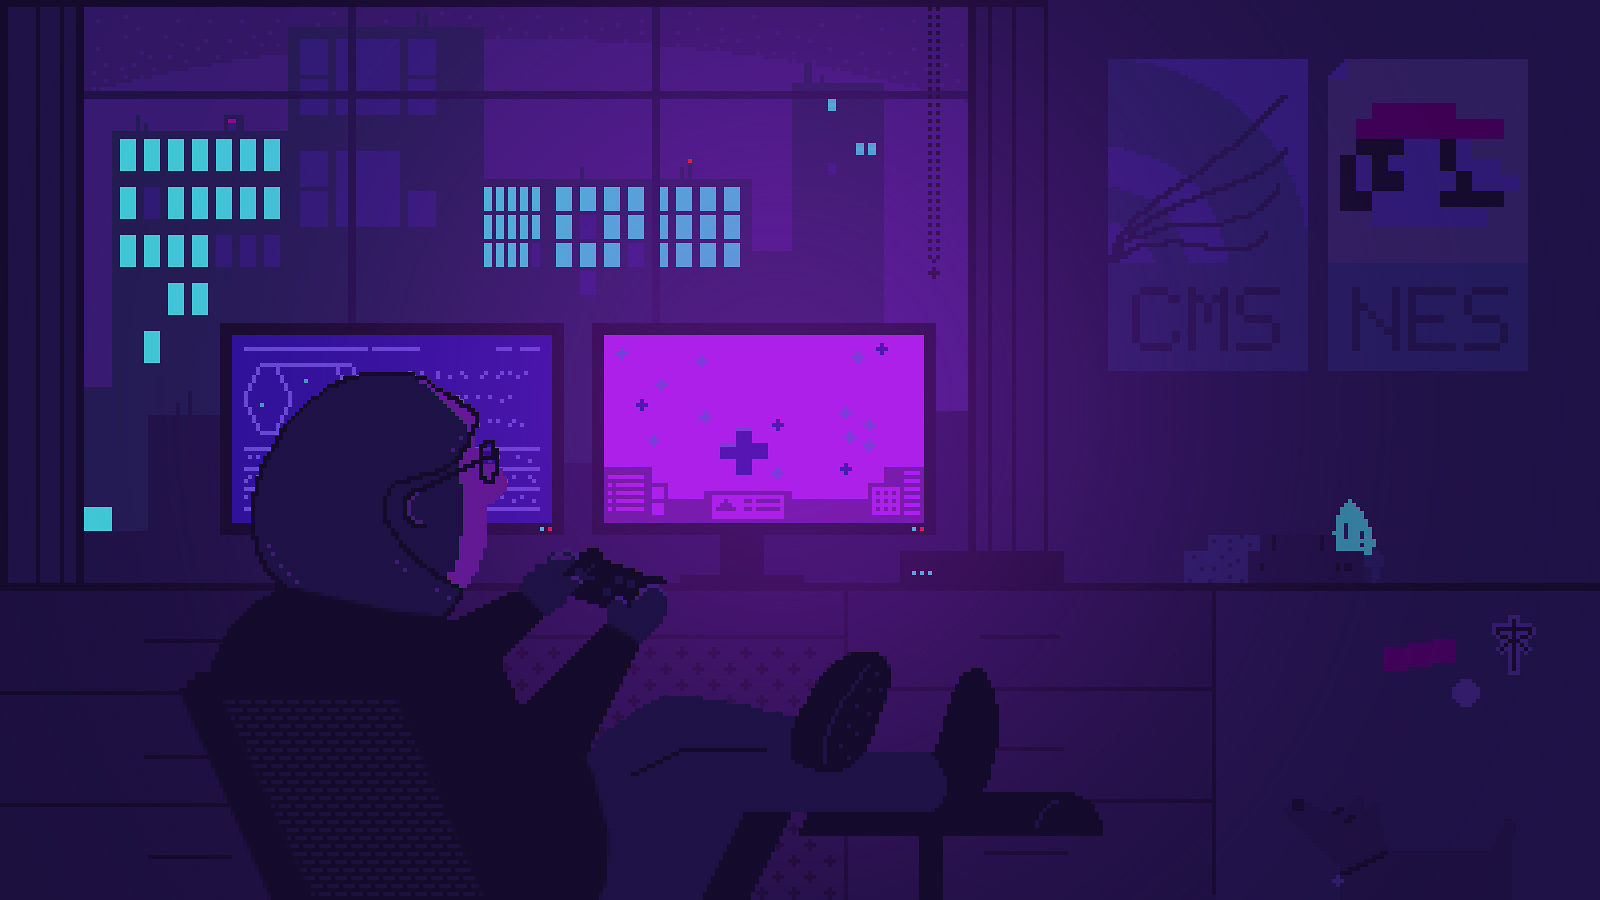 Illustration in 8-bit style showing a scientist playing a video game in a darkened room